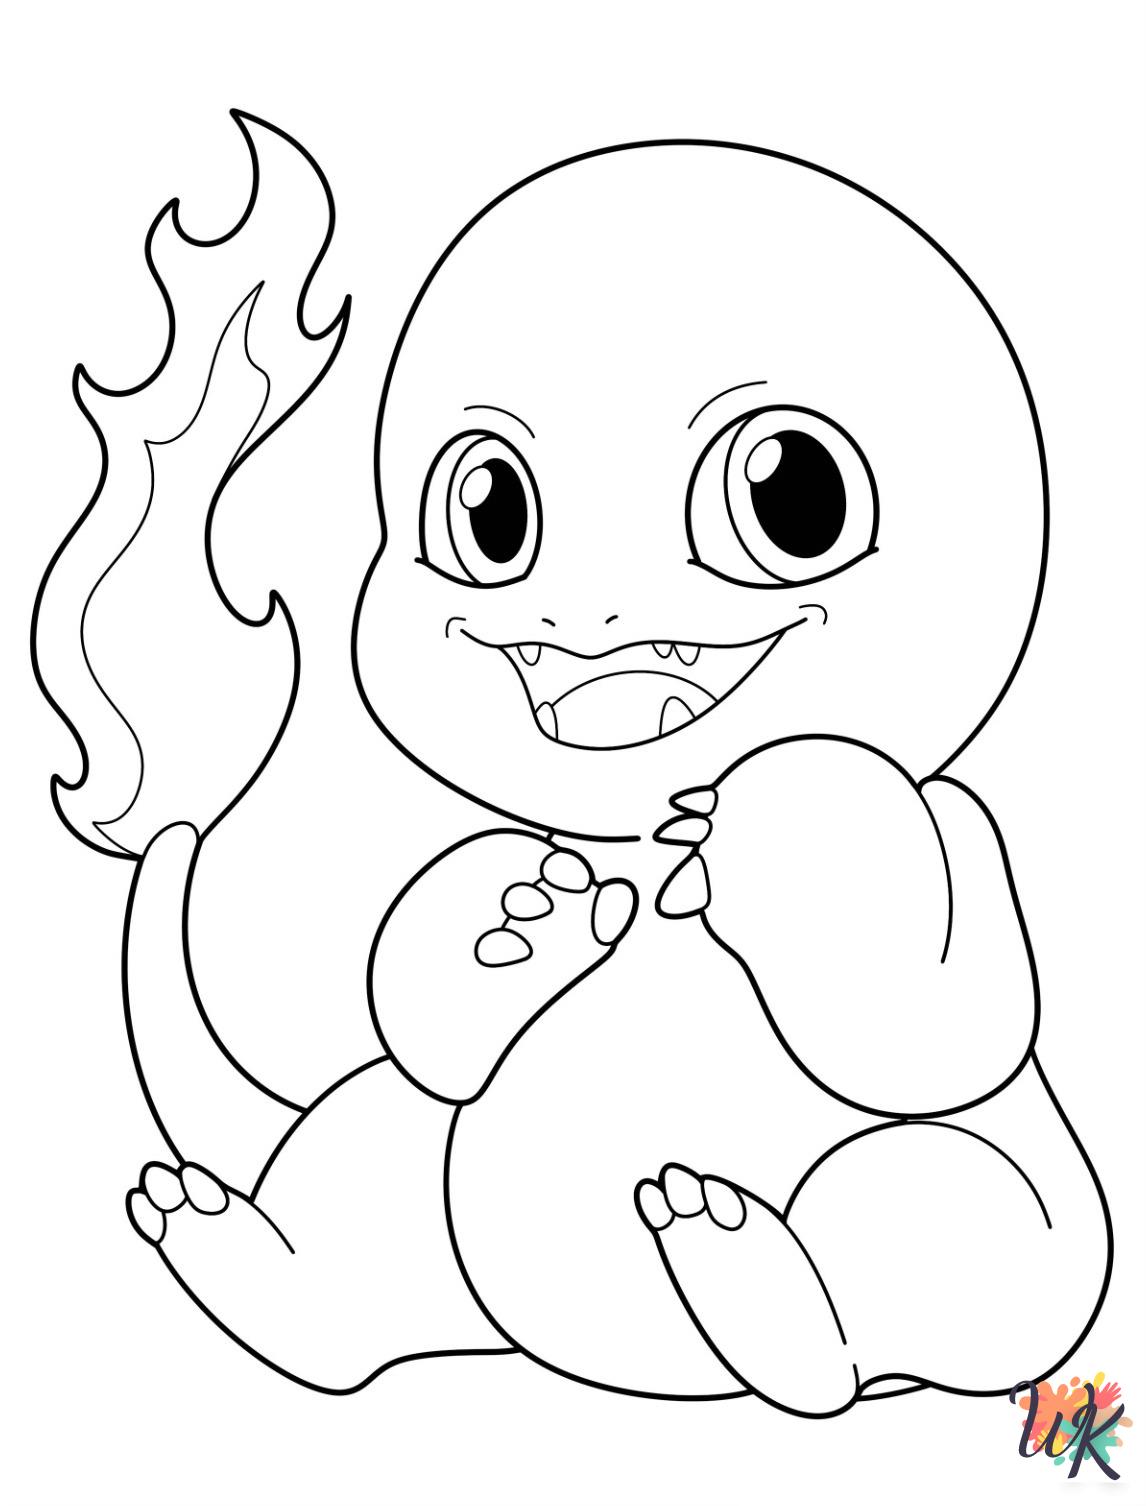 Charmander coloring pages for adults